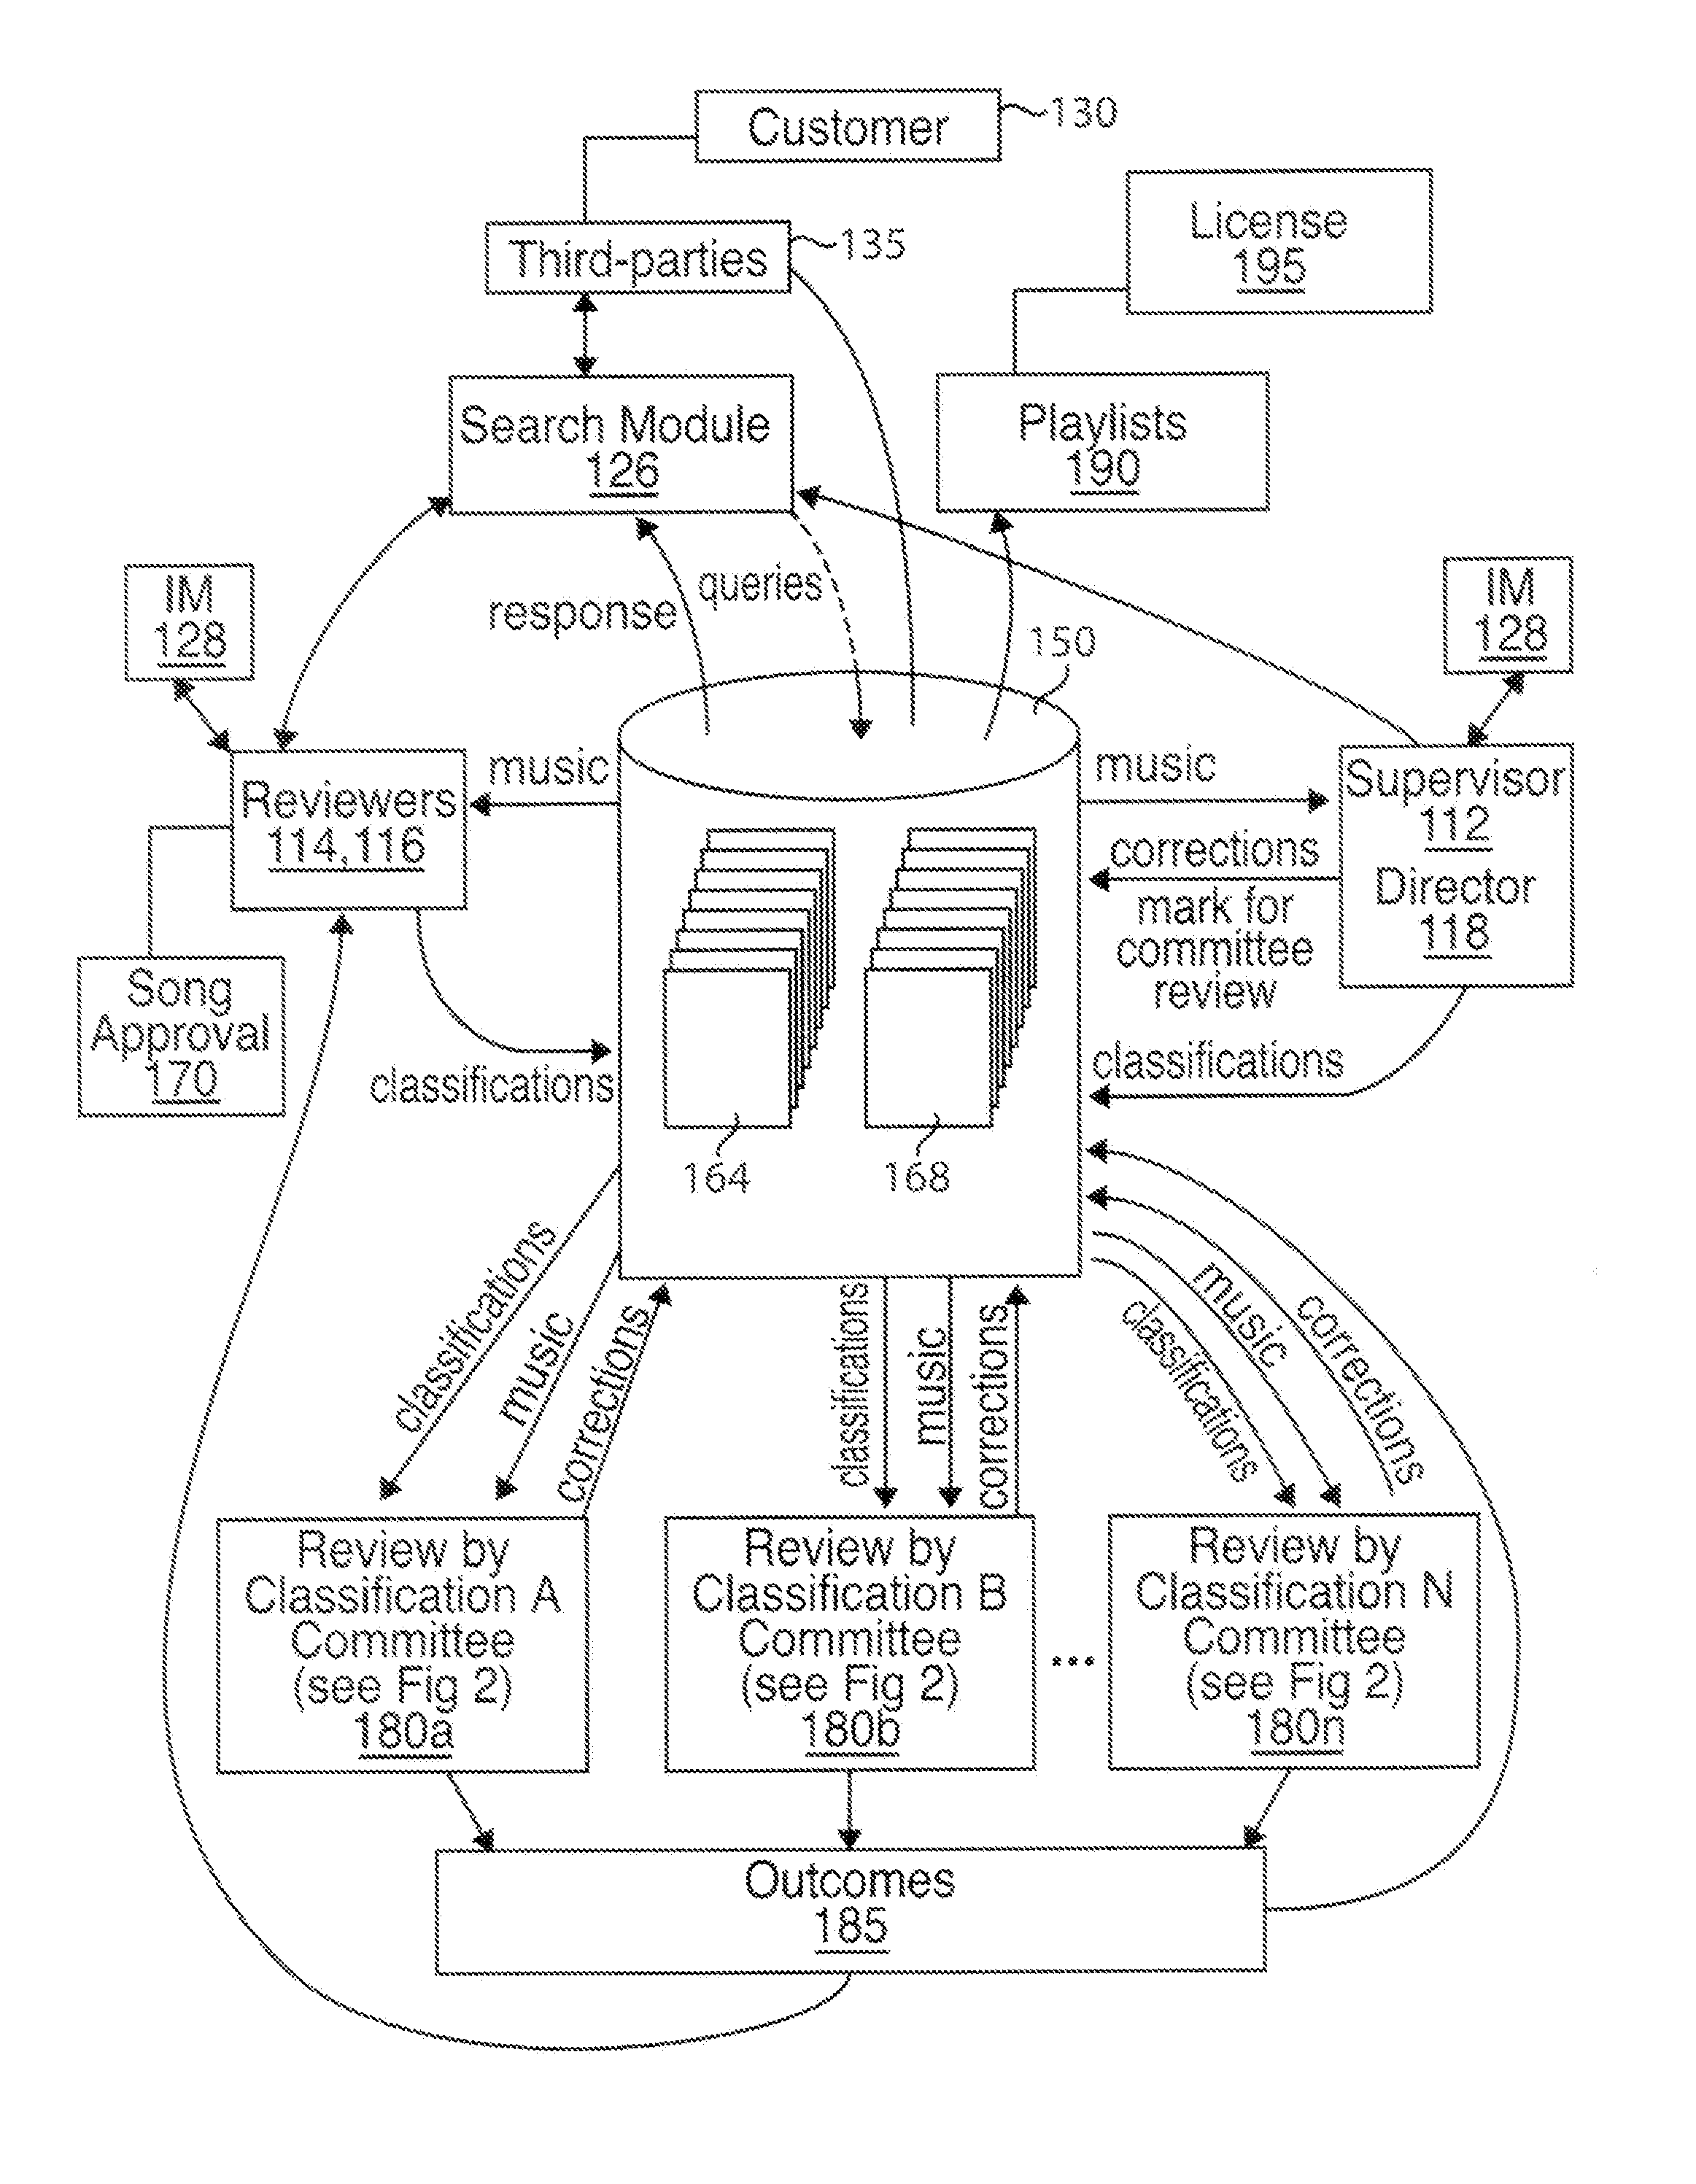 Method and System for Gathering and Pseudo-Objectively Classifying Copyrightable Material to be Licensed Through a Provider Network